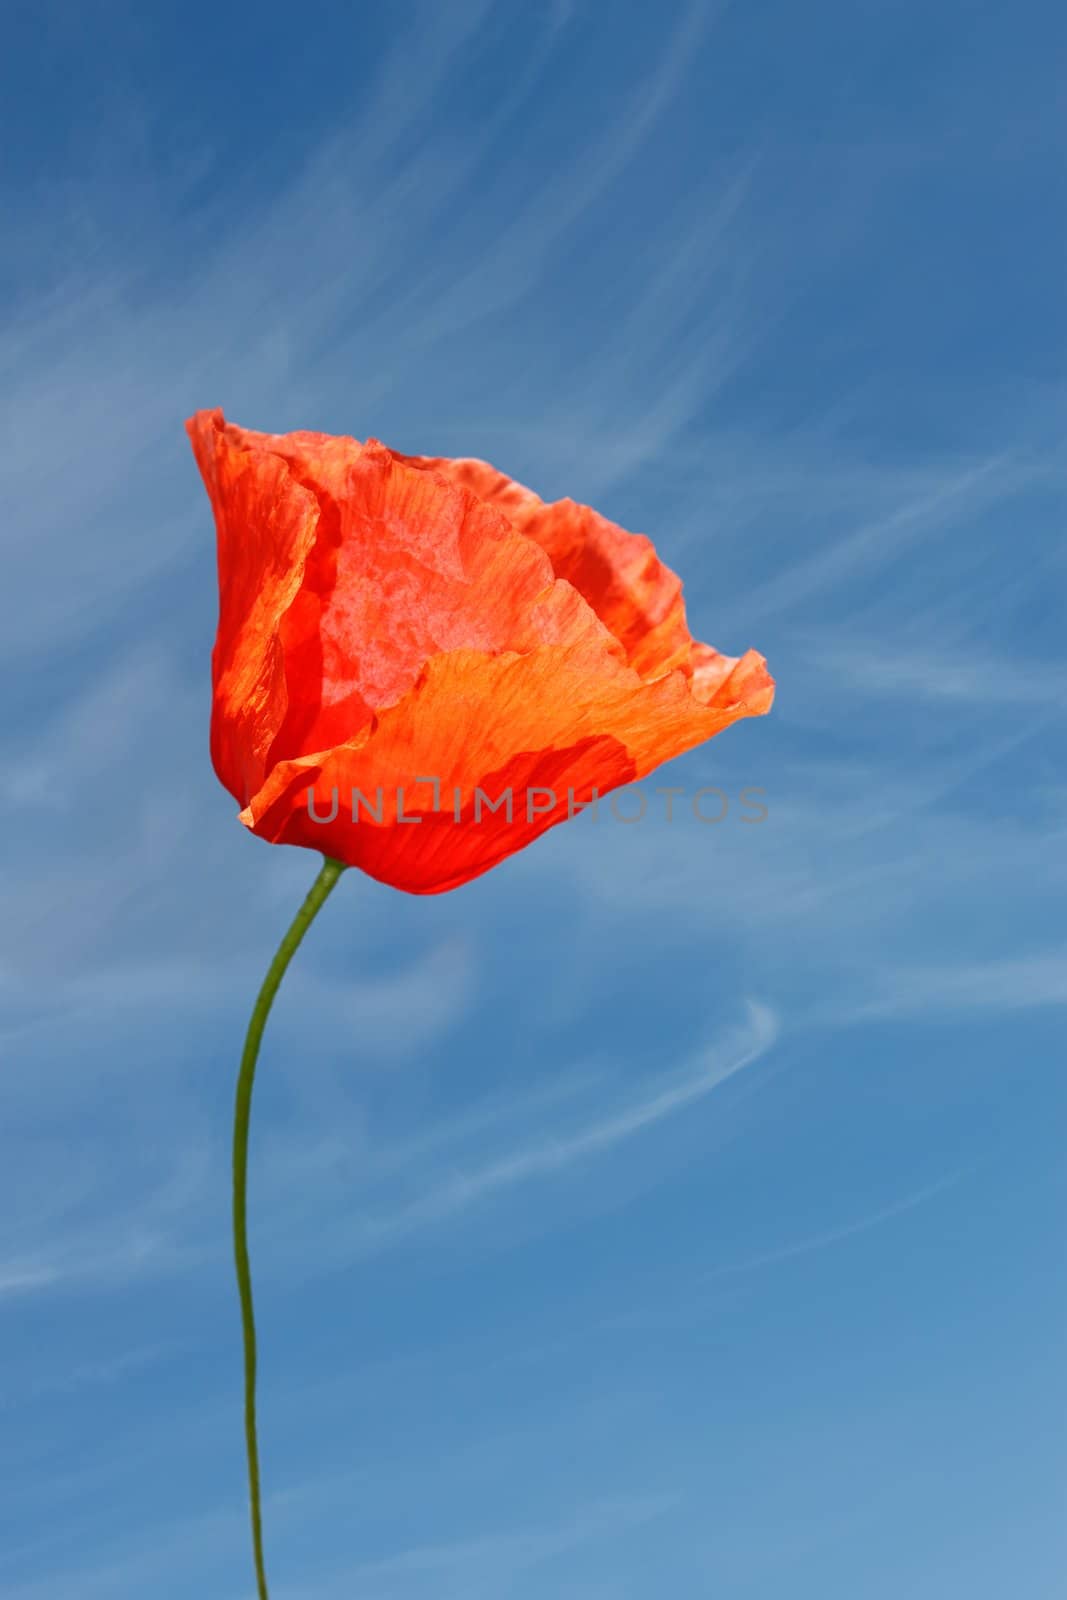 Red poppy flower against blue sky by qiiip